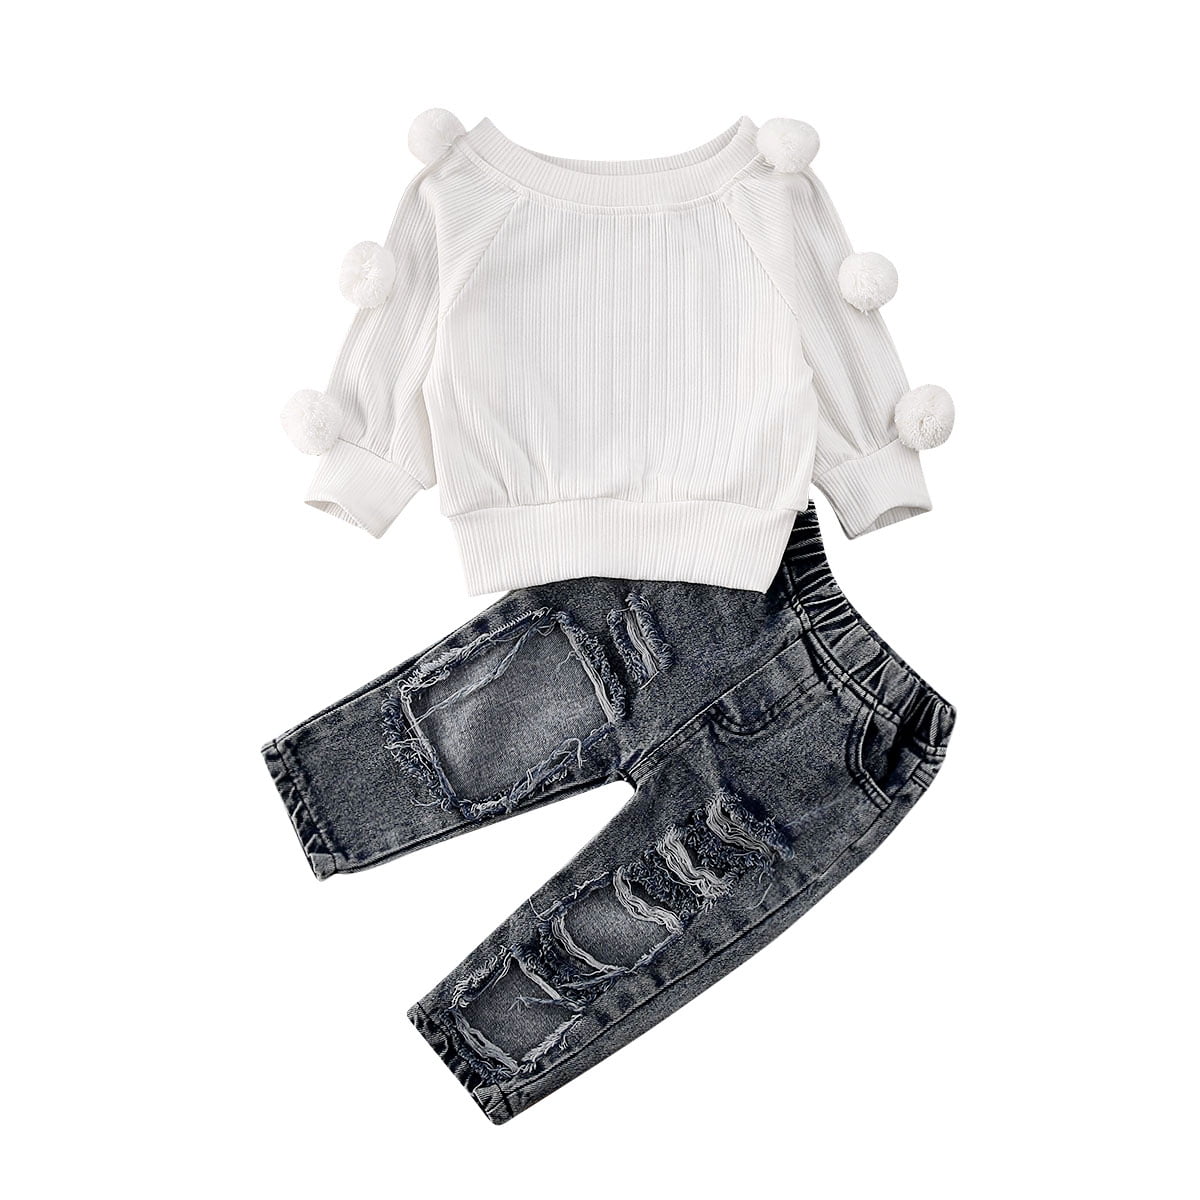 Toddler Kids Baby Girl Outfit Clothes T-shirt Tops+Ripped Legging Pants 2PCS Set 